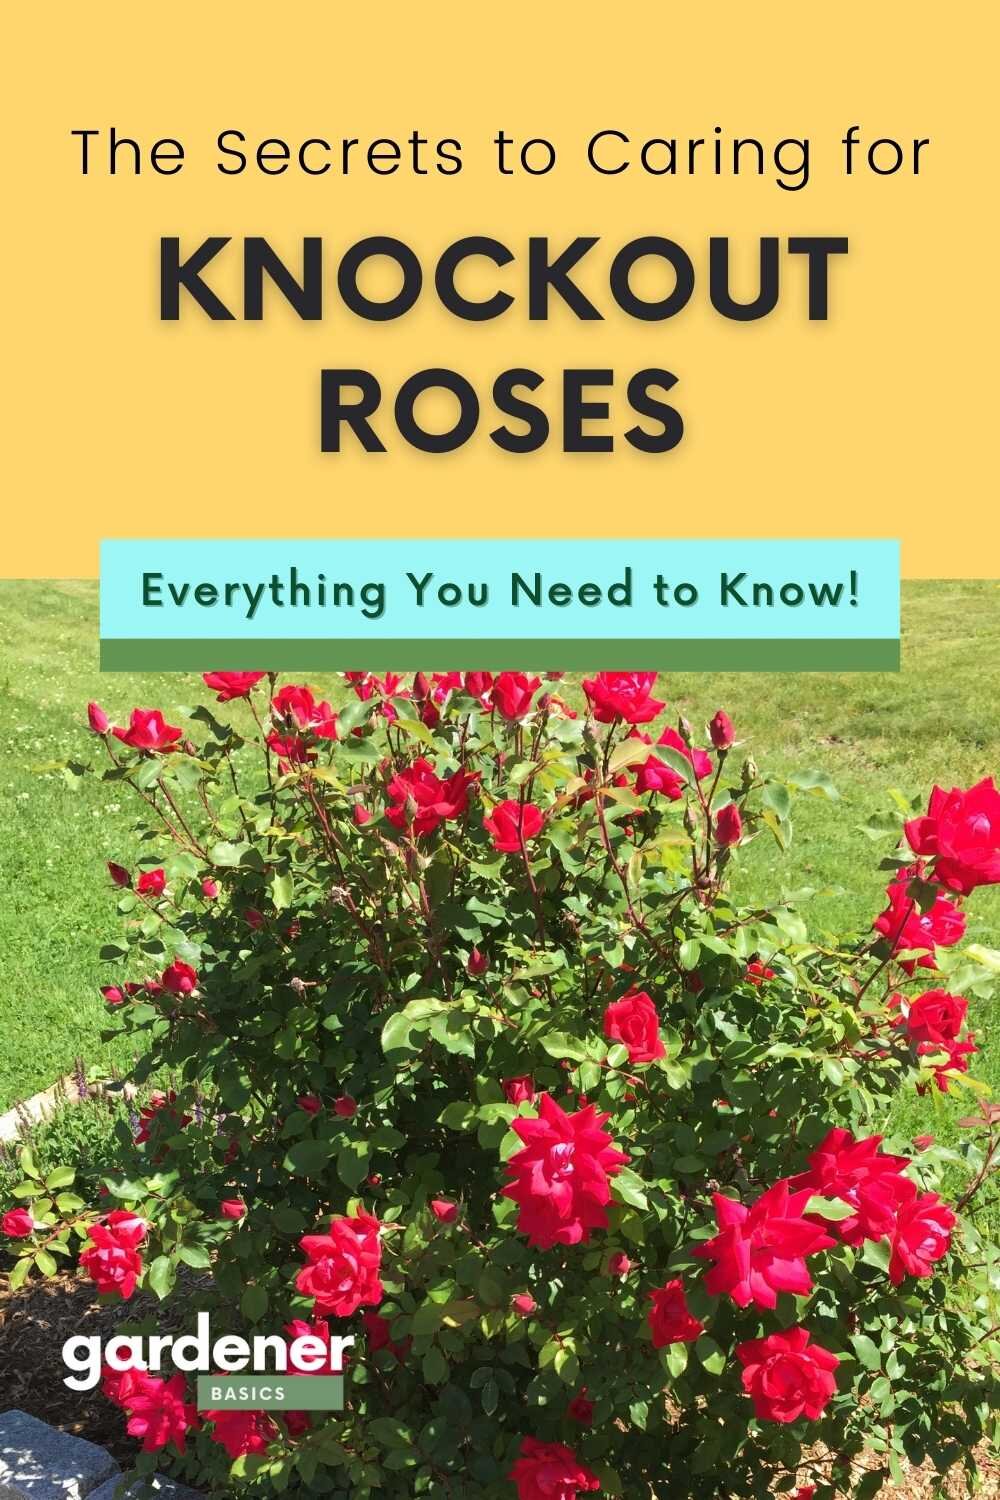 The Secret to Caring For Knockout Roses — Gardening, Herbs, Plants, and  Product Reviews